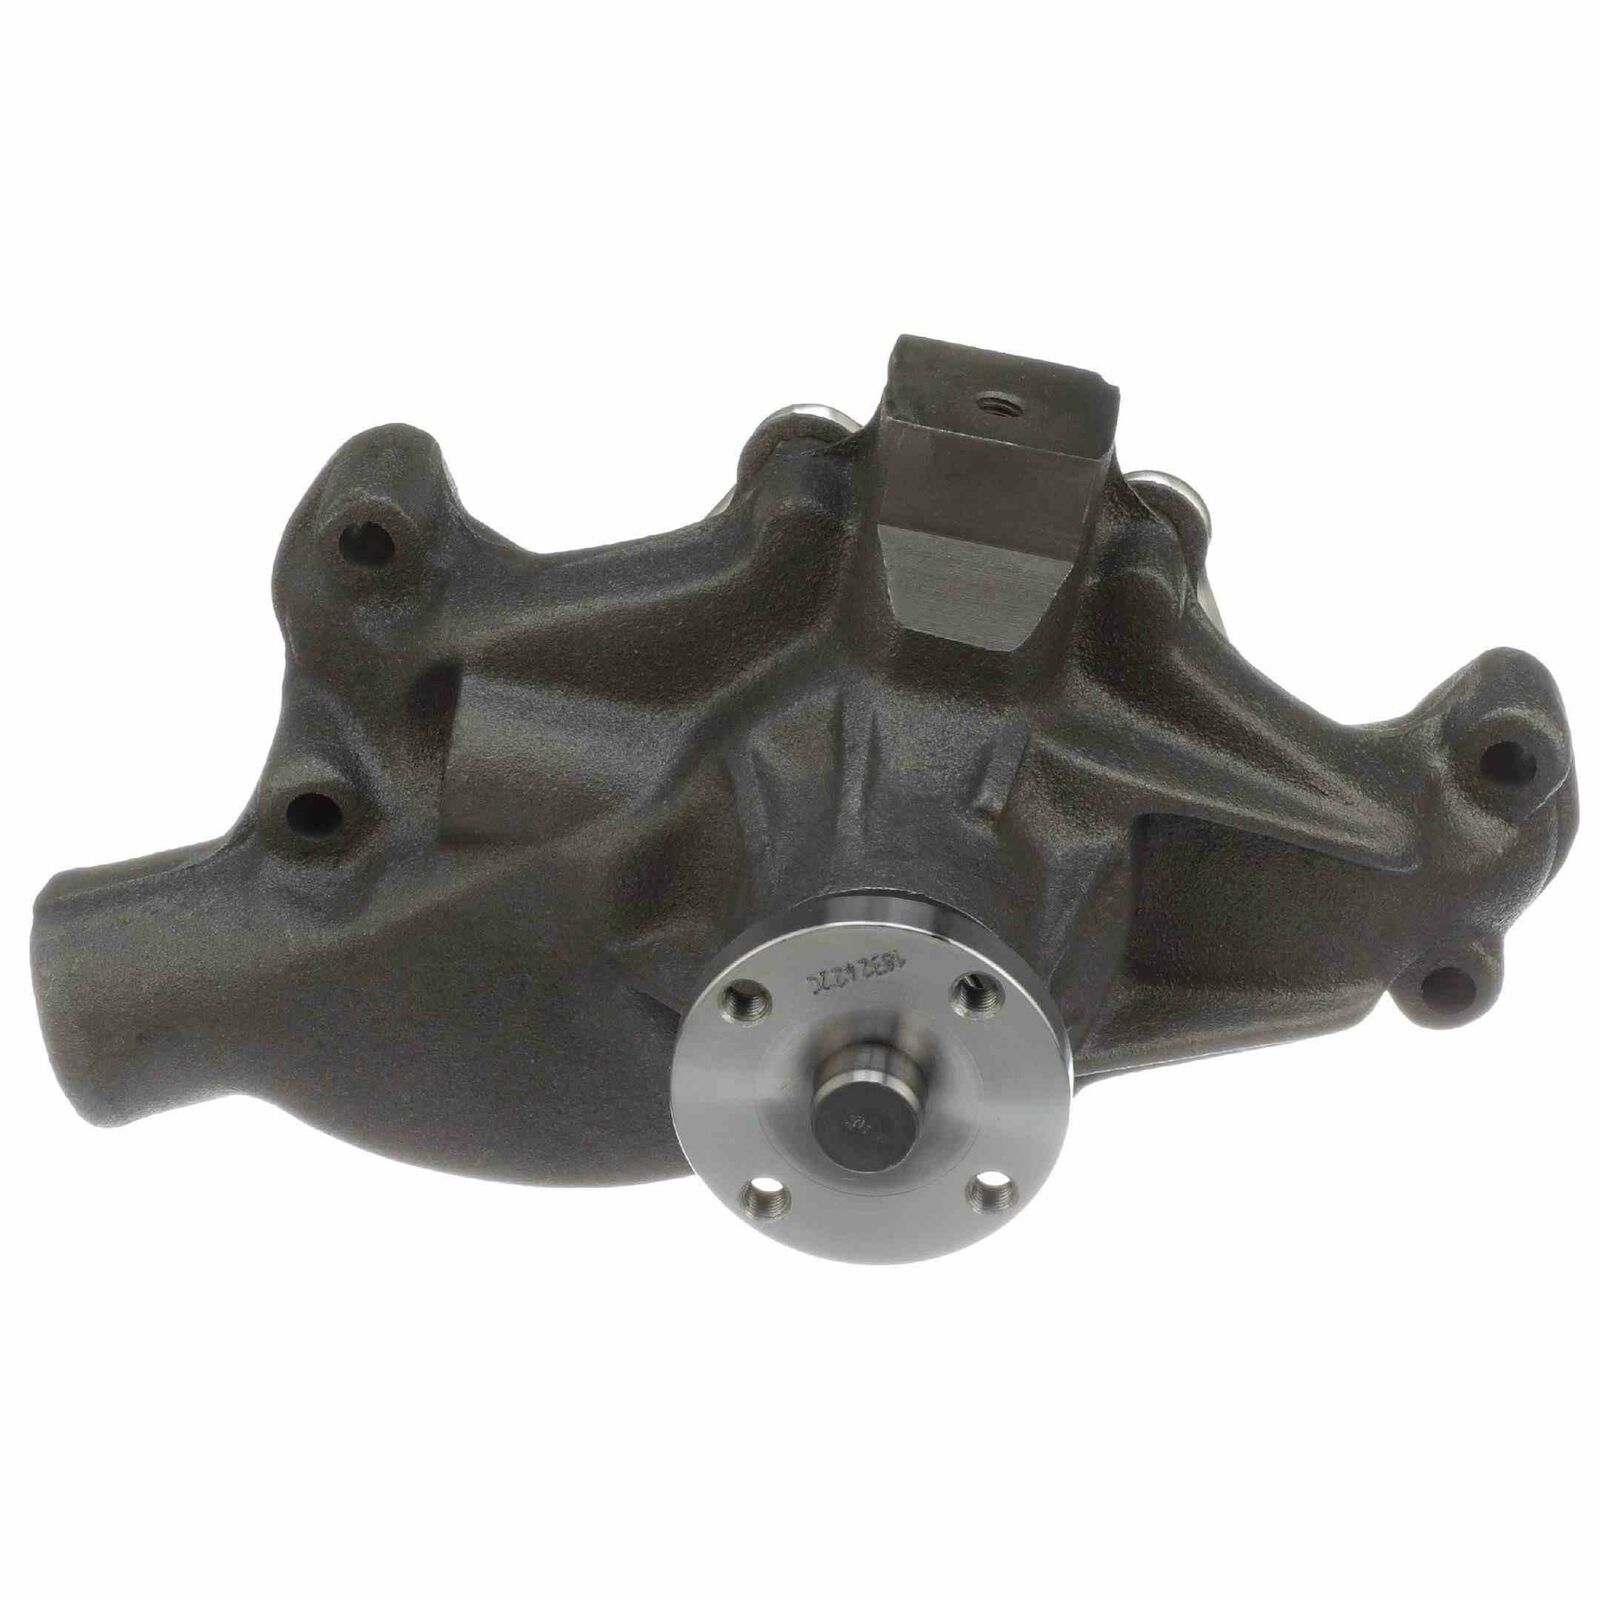 Clearance SALE Limited time Engine Water Pump Max 64% OFF Compatible Chevrolet With 34